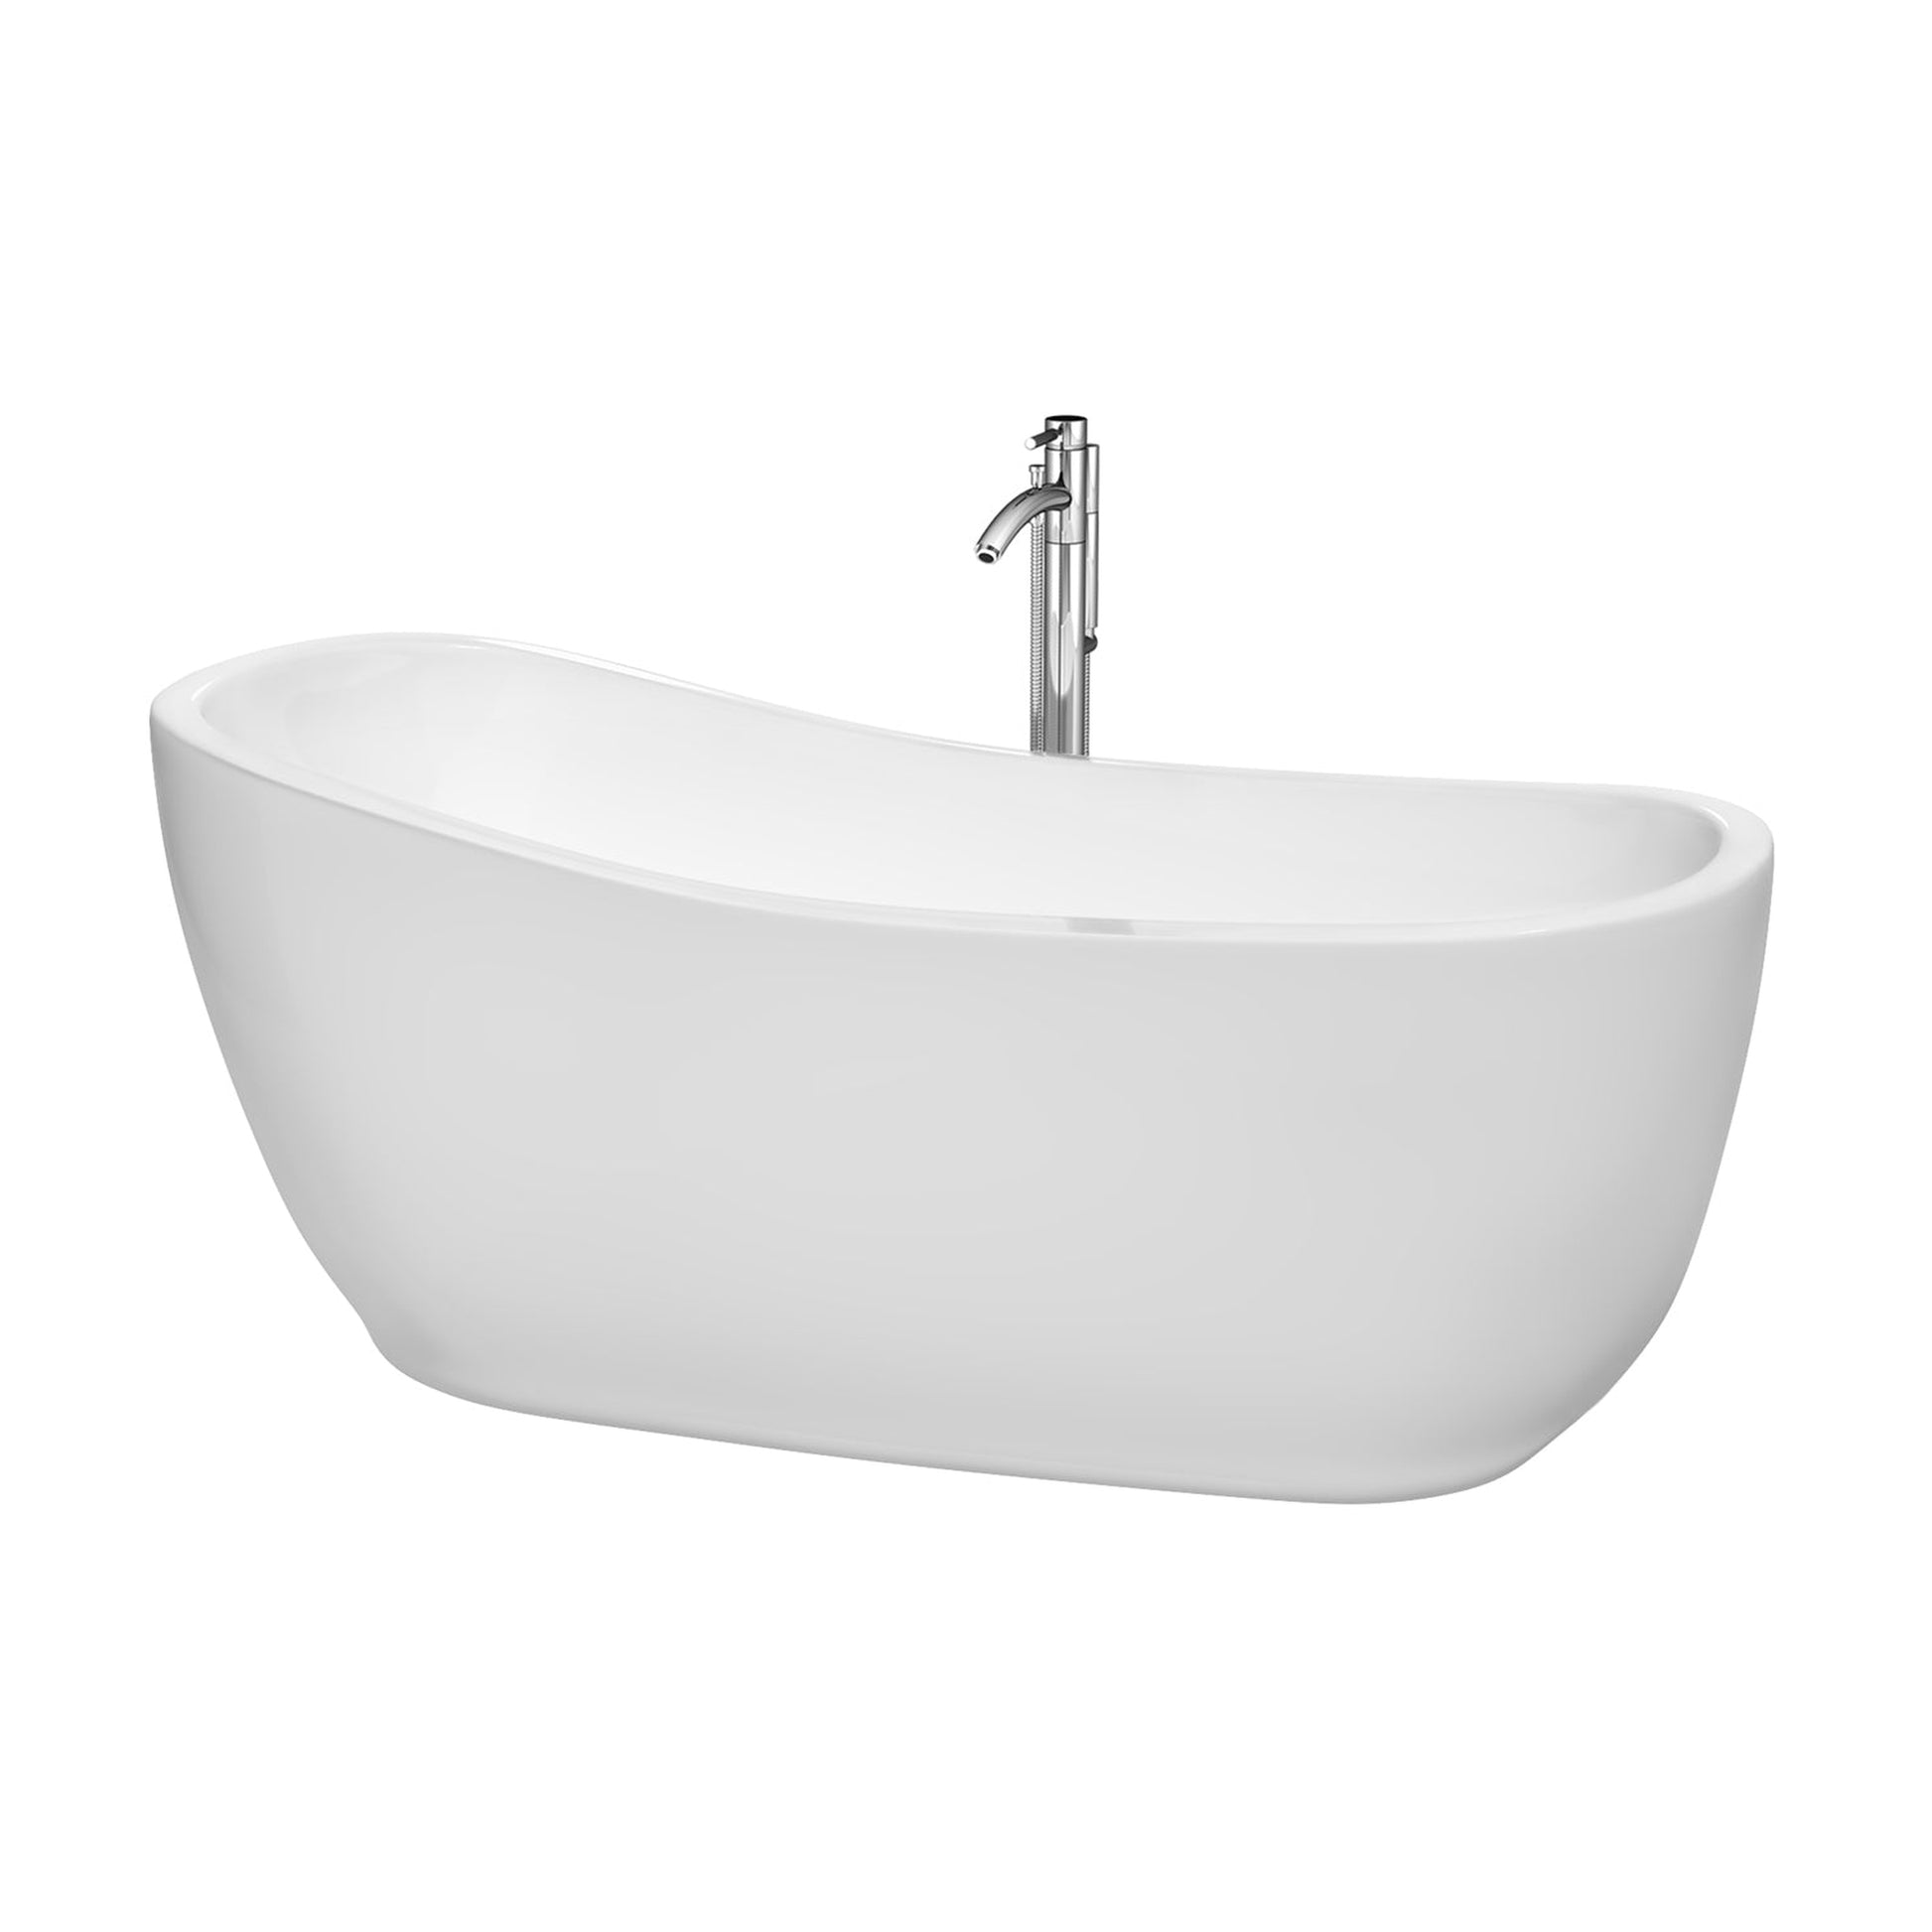 Wyndham Collection Margaret 66" Freestanding Bathtub in White With Floor Mounted Faucet, Drain and Overflow Trim in Polished Chrome